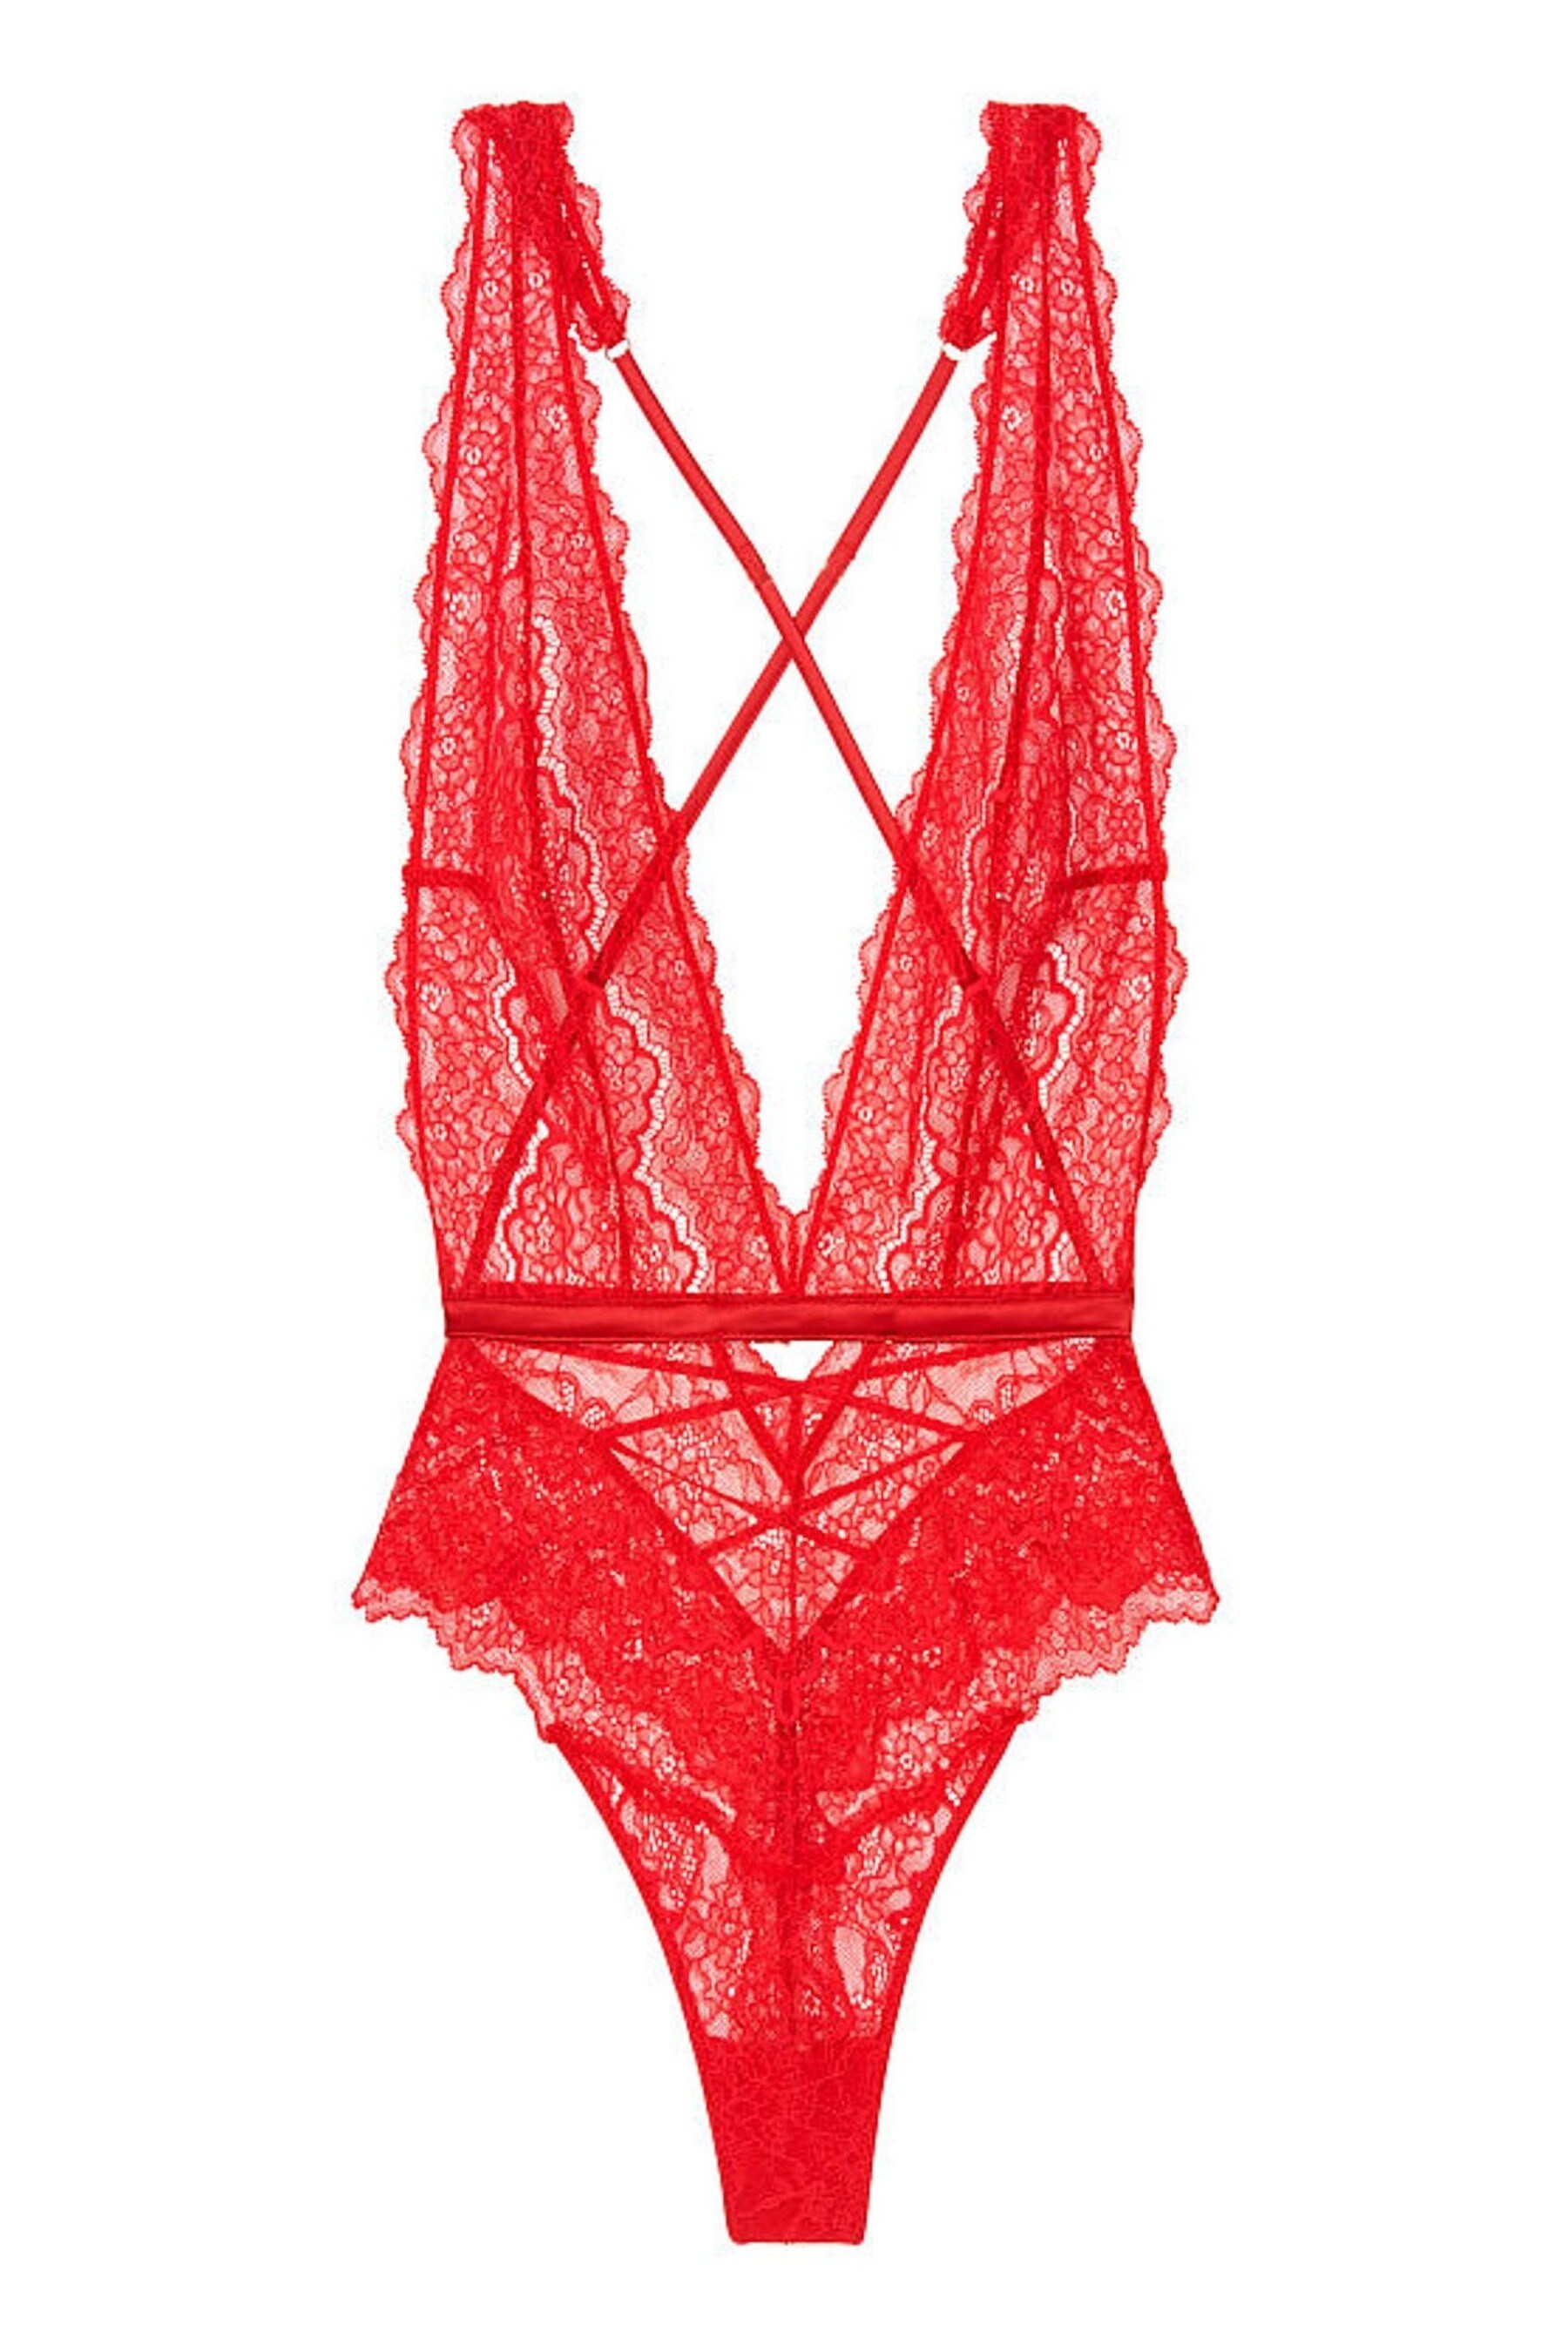 Buy Victoria's Secret Dream Angels Unlined Lace Plunge Teddy from the ...